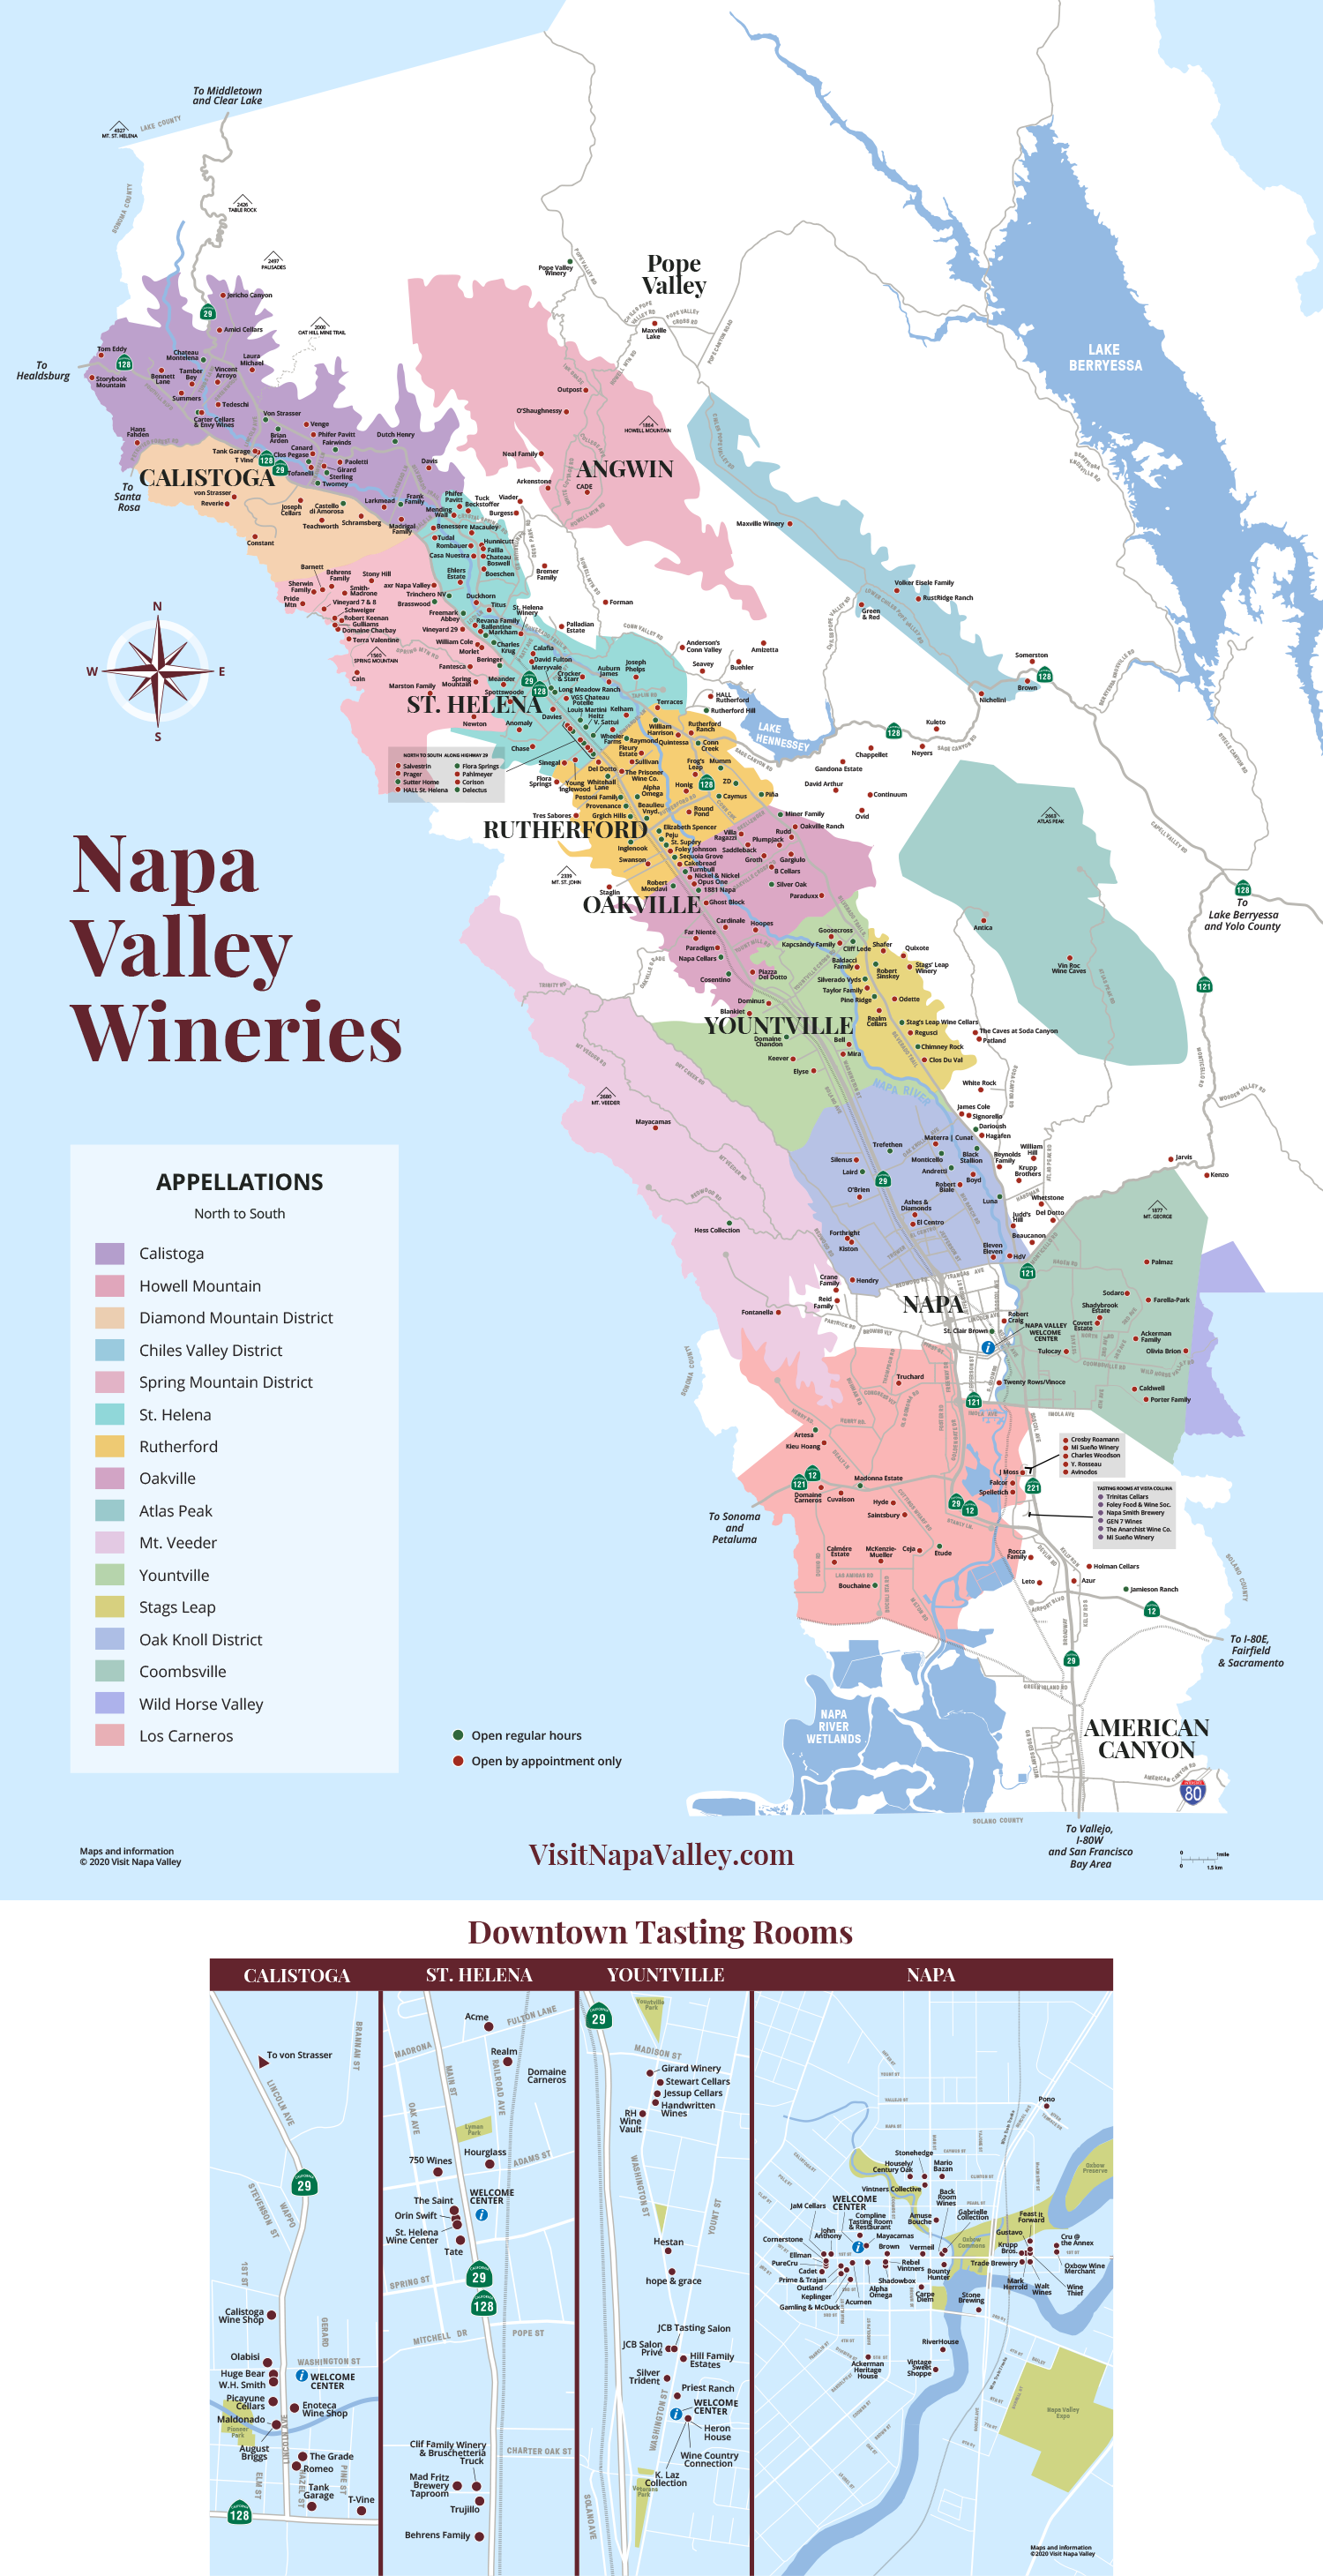 Napa Valley Wineries And Tasting Rooms 93fa5526 5659 4d65 B61b 2a5aee4ff804 